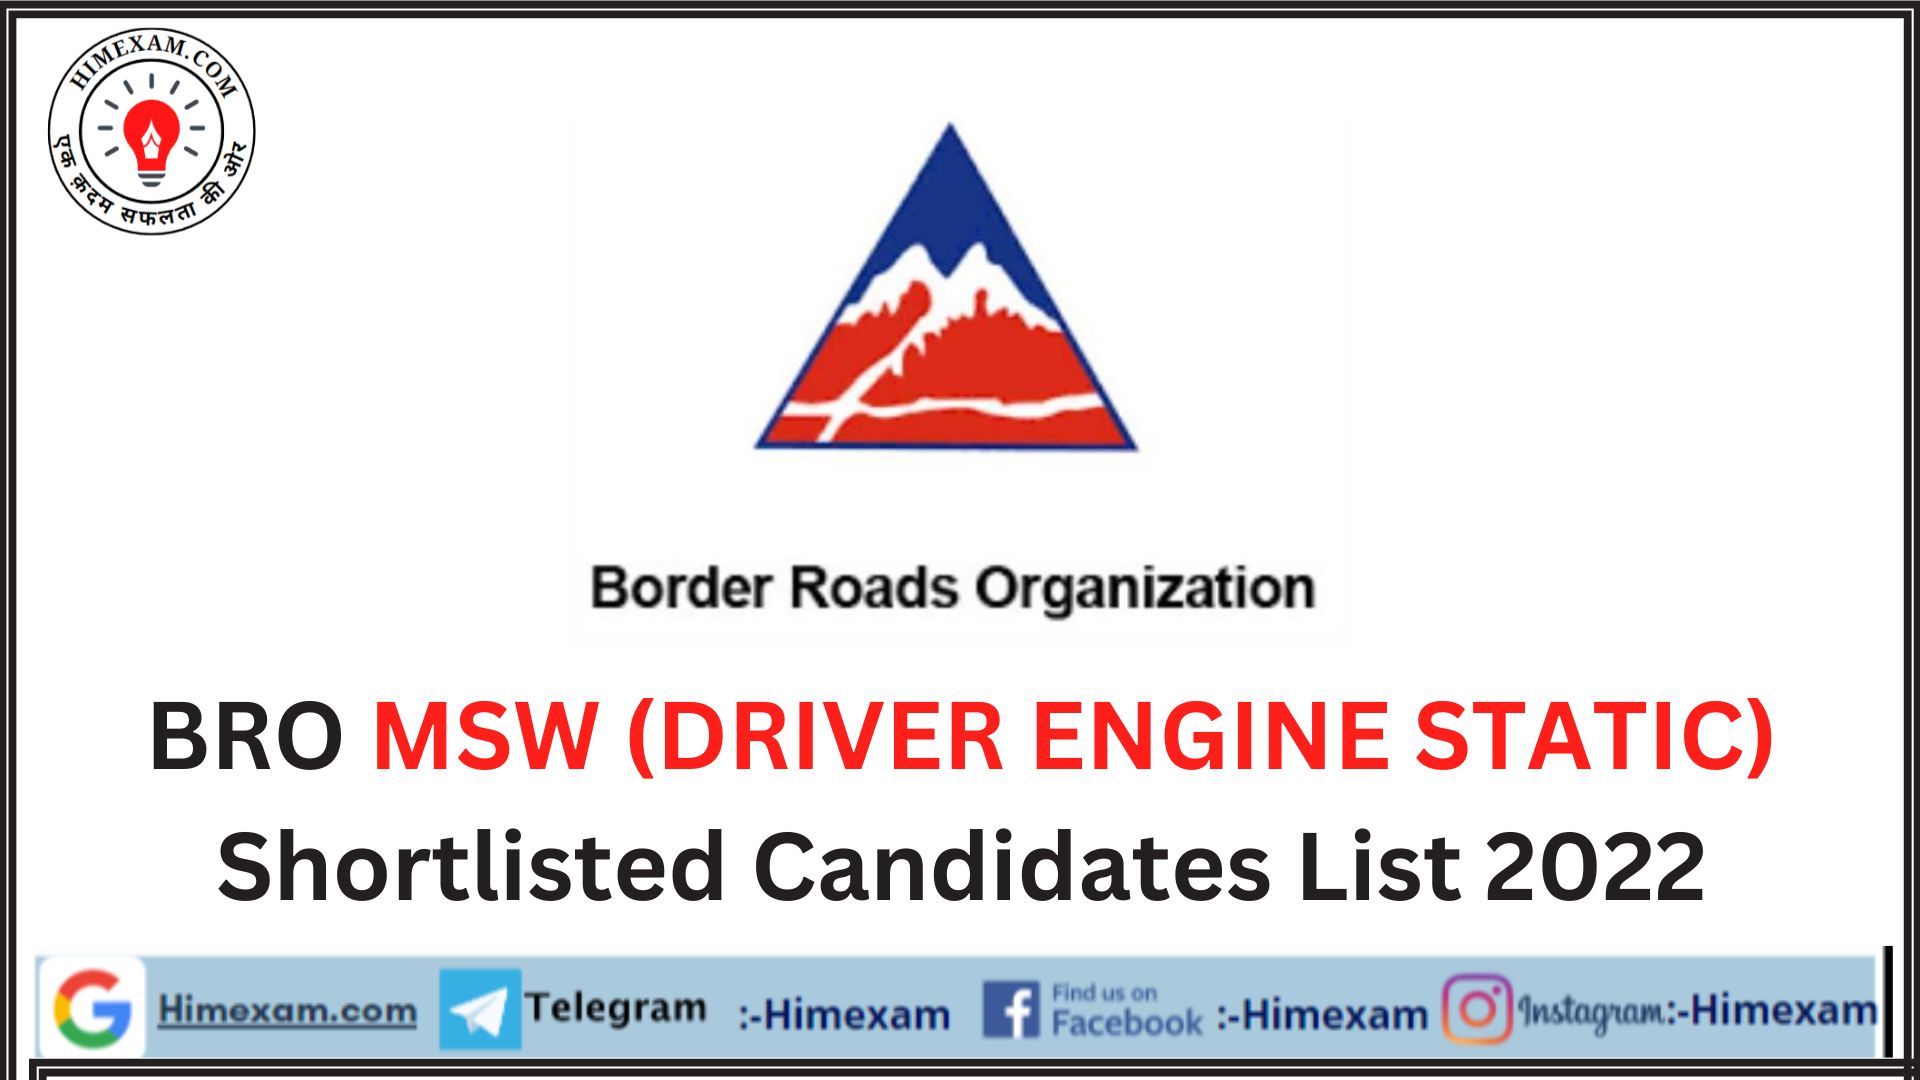 BRO MSW (DRIVER ENGINE STATIC) Shortlisted Candidates List 2022